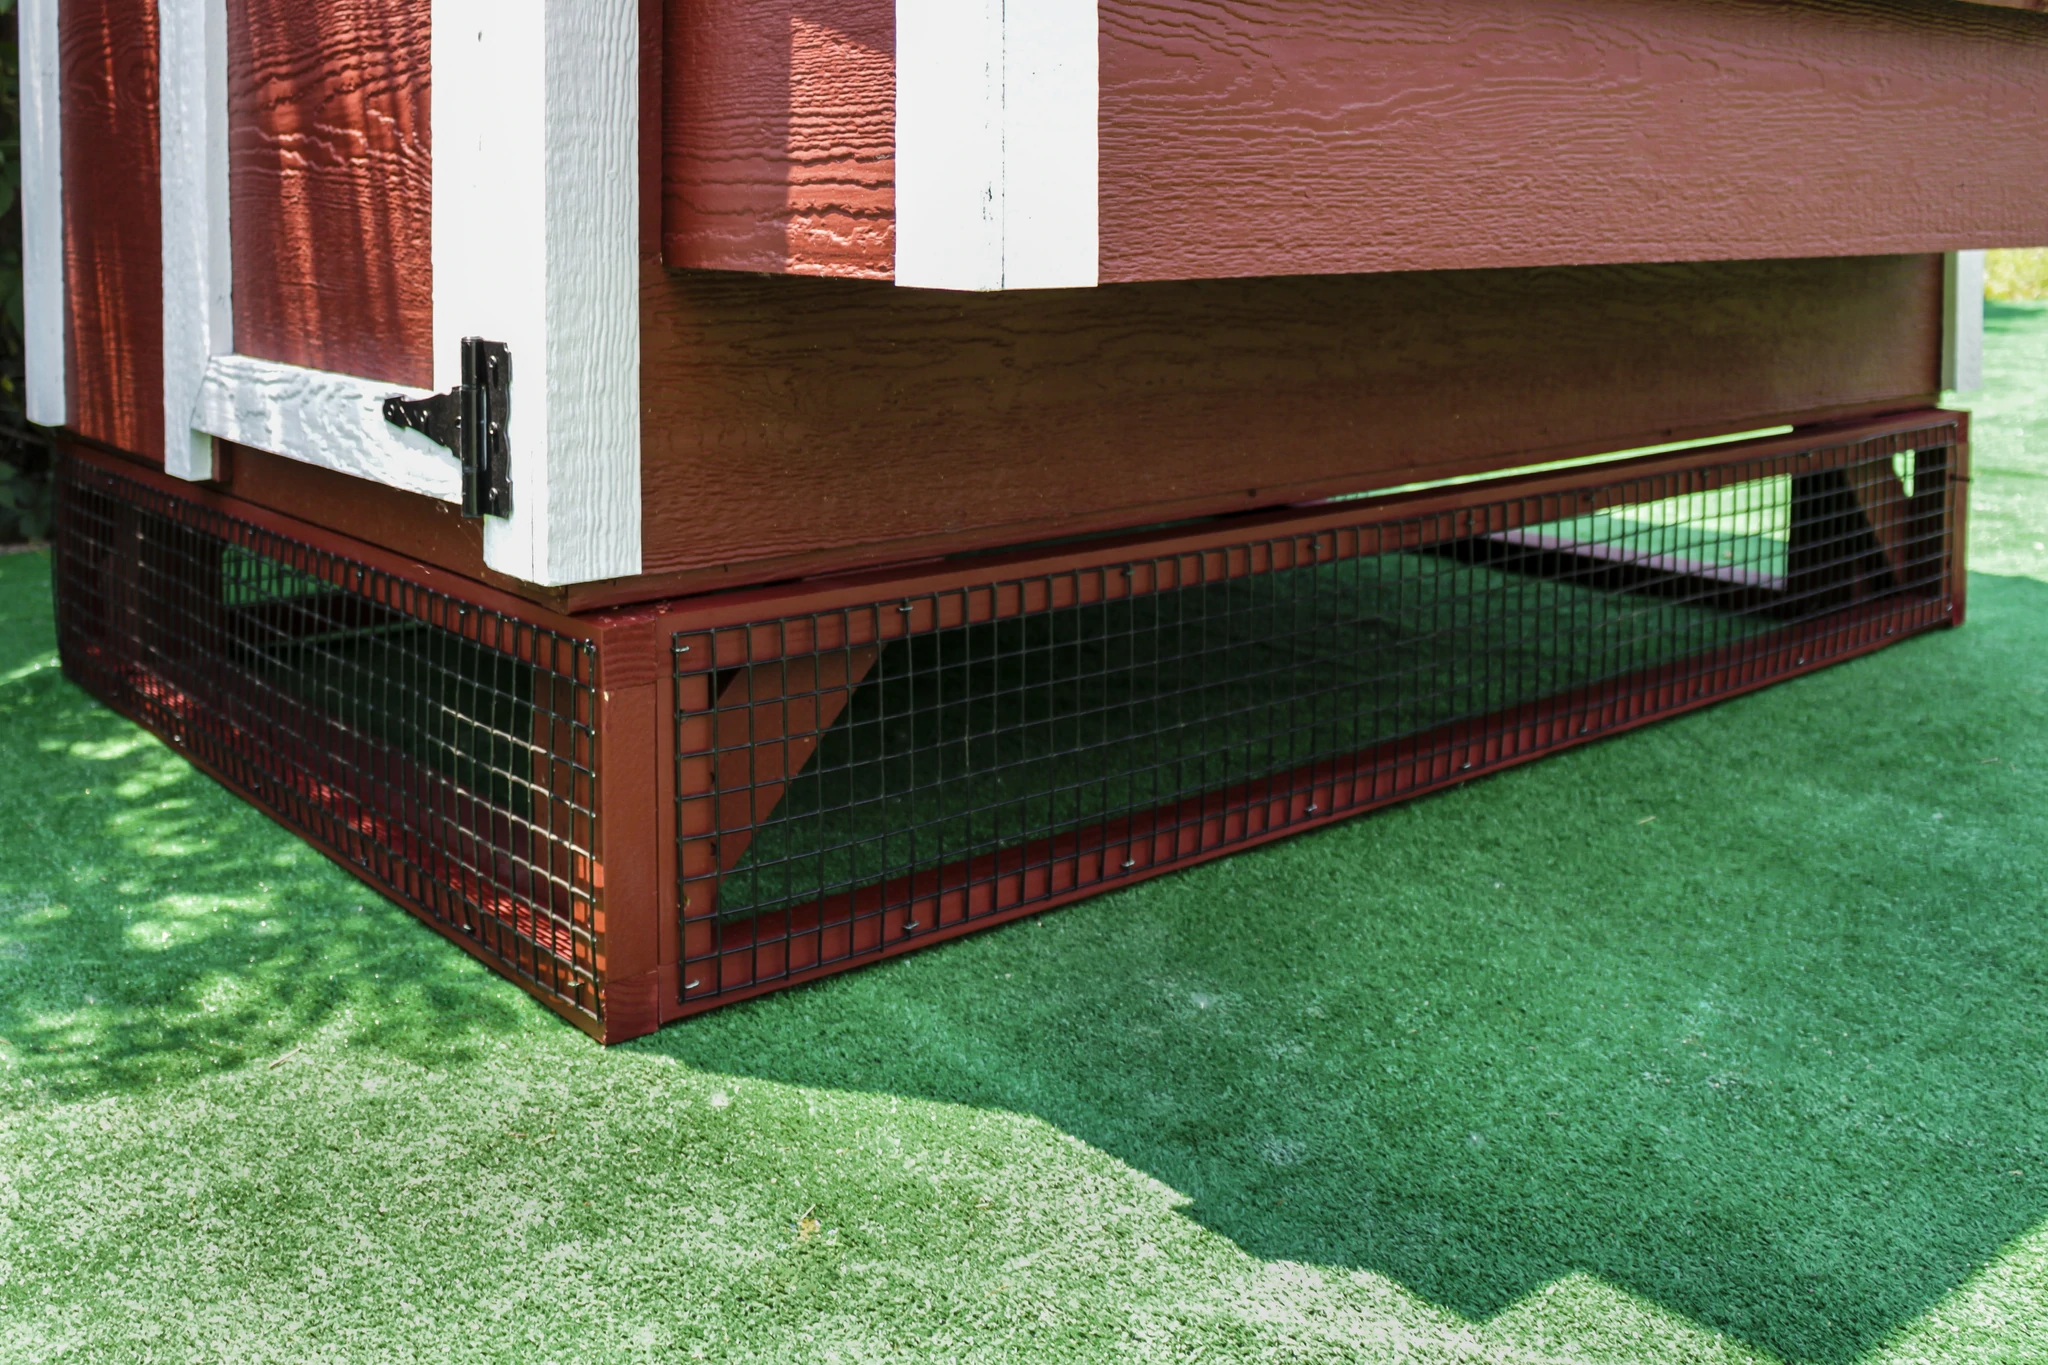 OverEZ® Chicken Coop Wire Panels - Extra Large